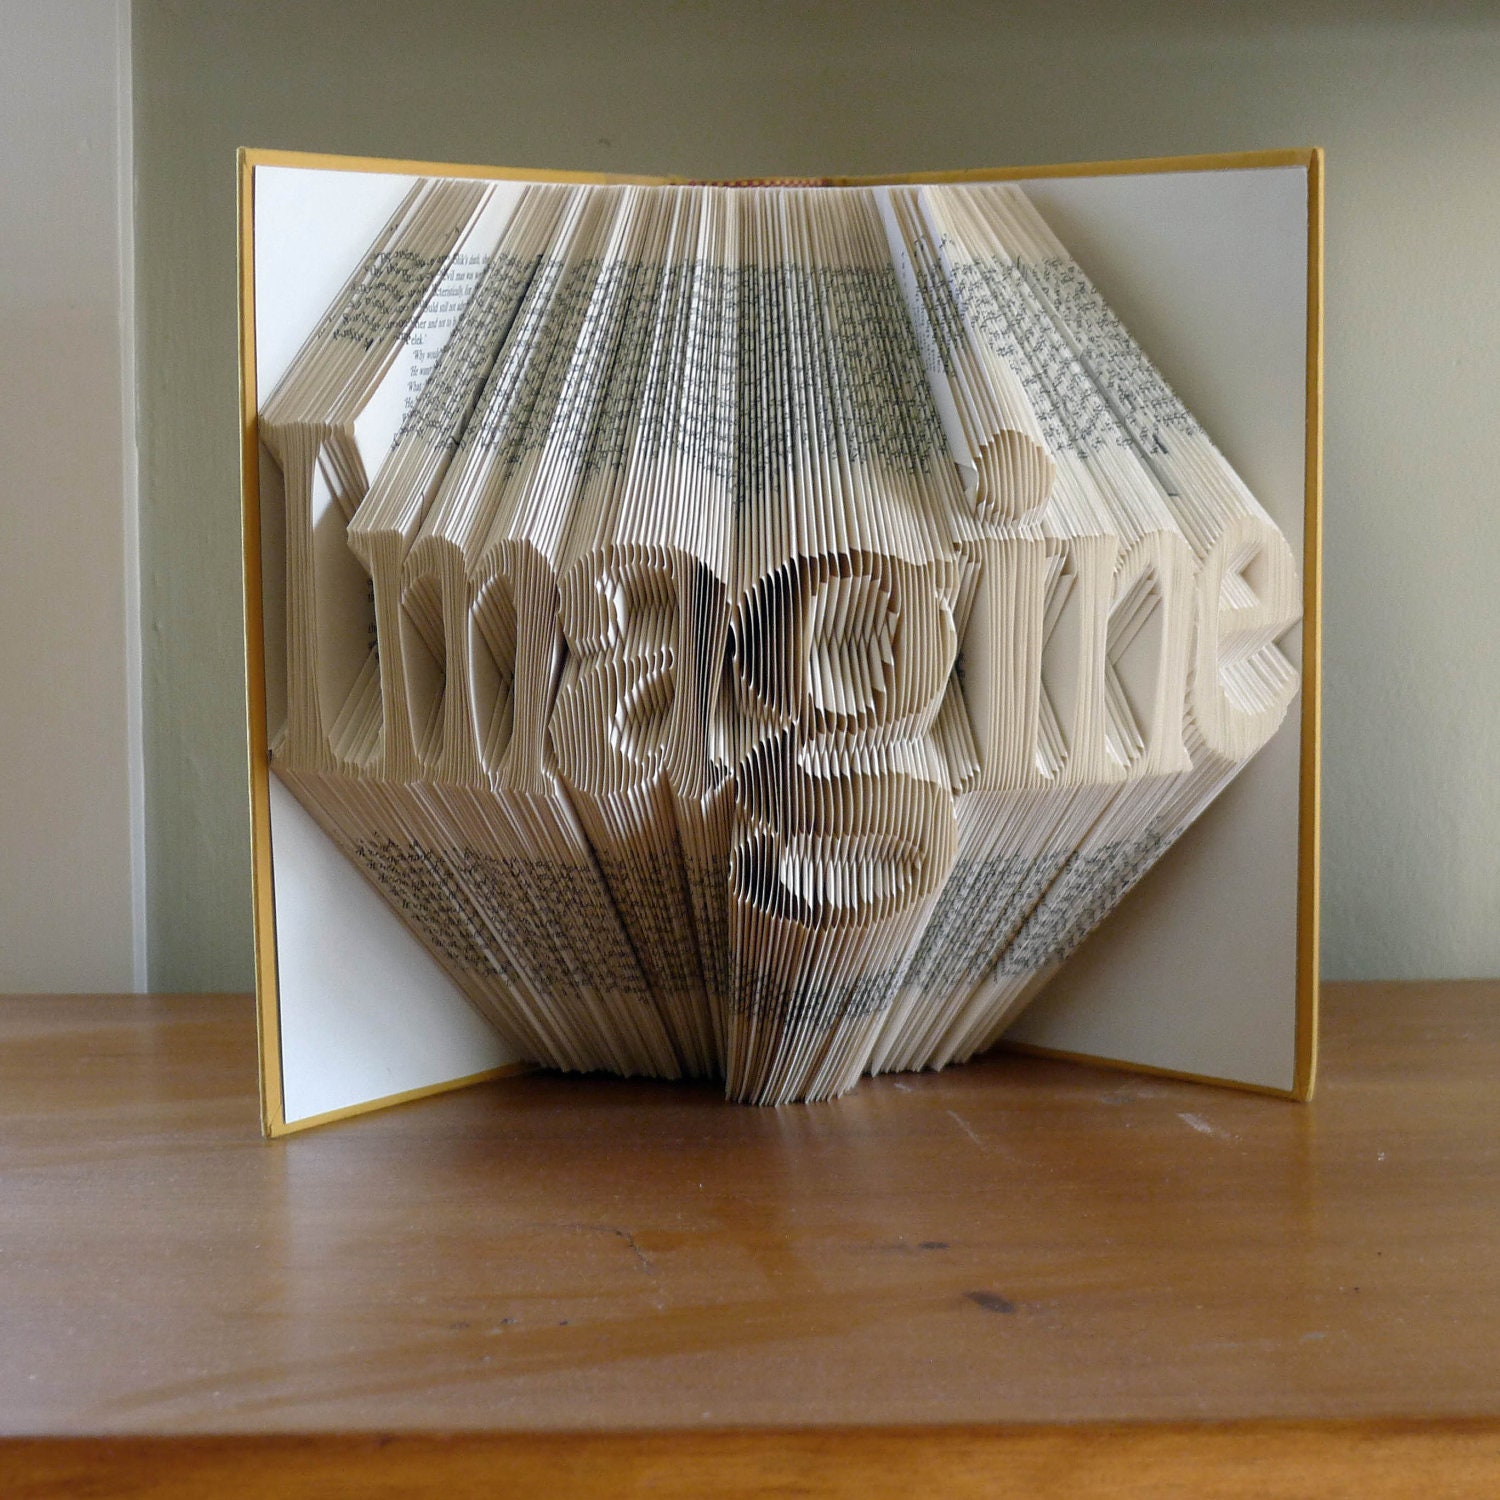 Best Selling Item - Unique Present - Custom Folded Book Sculpture -  Imagine - Your Choice of Words - Great Gift...